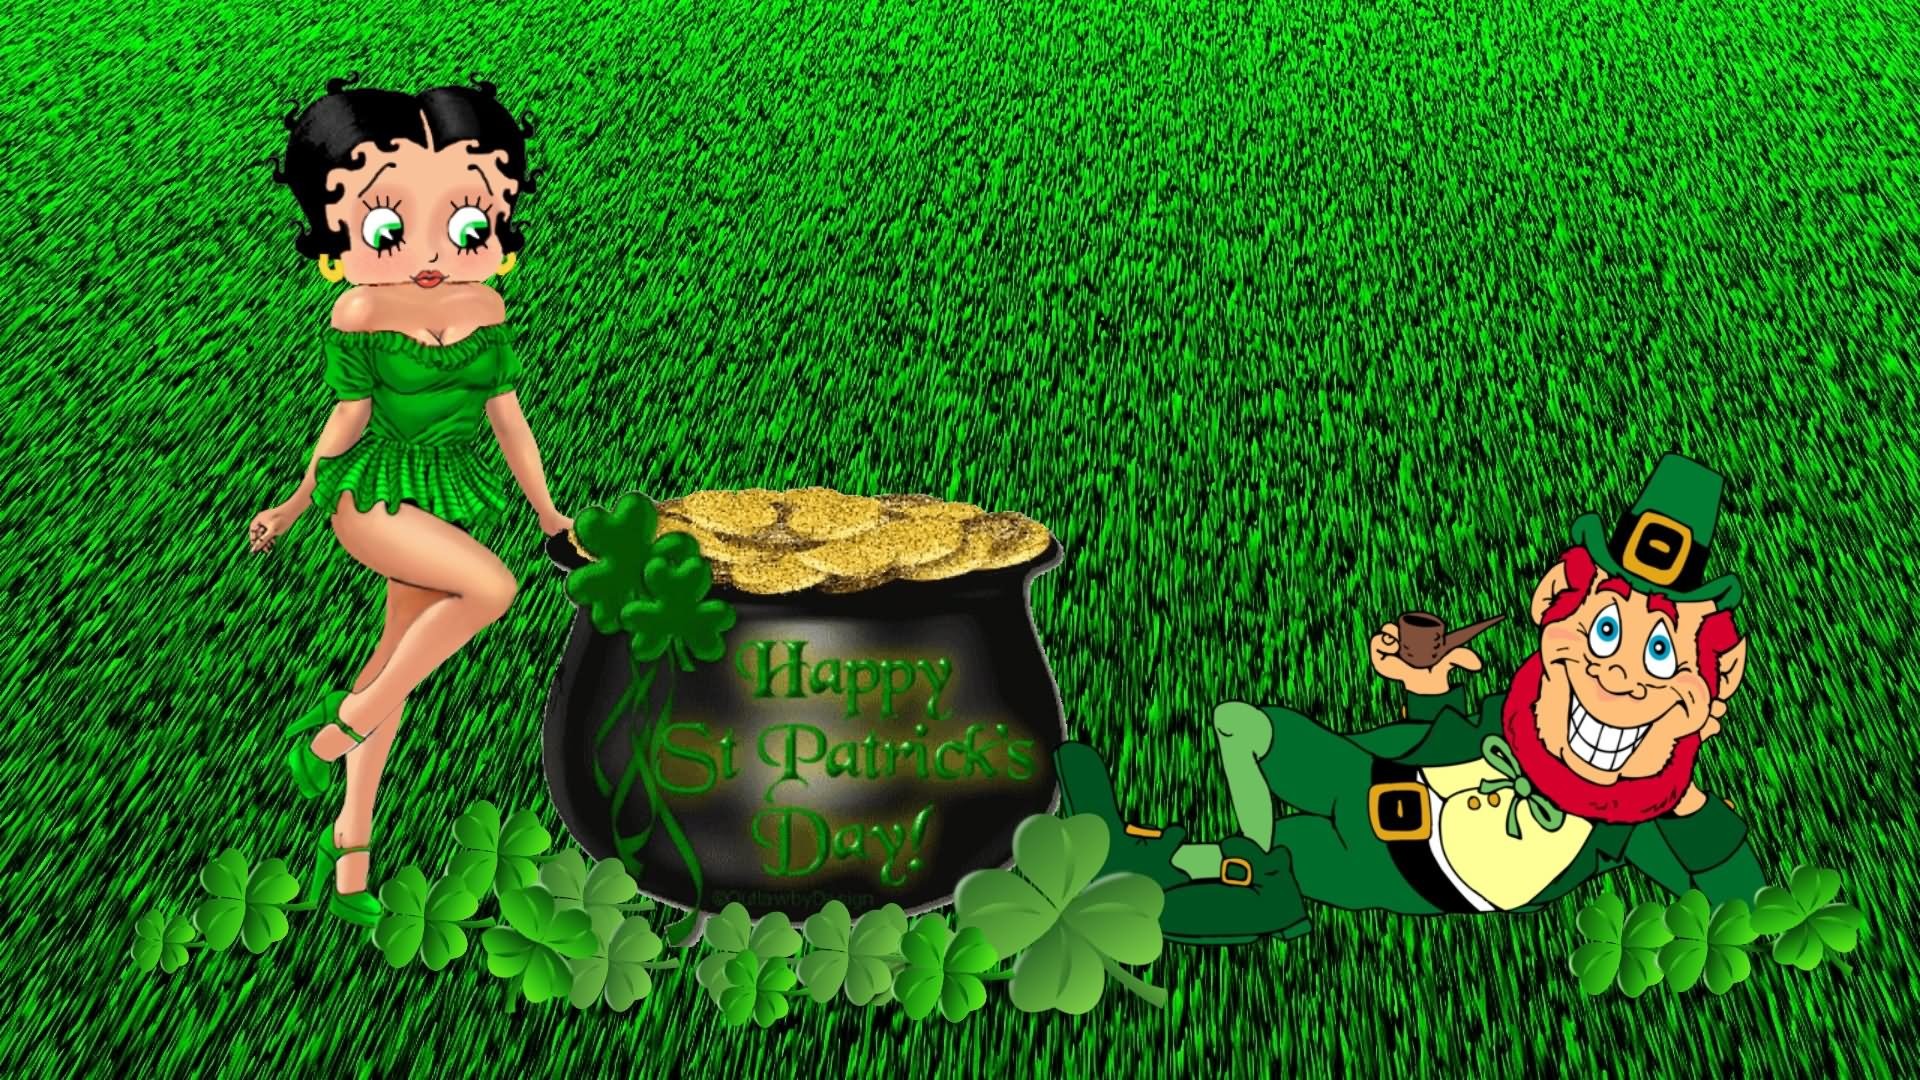 1920x1080 25 Saint Patrick's Day Wallpapers